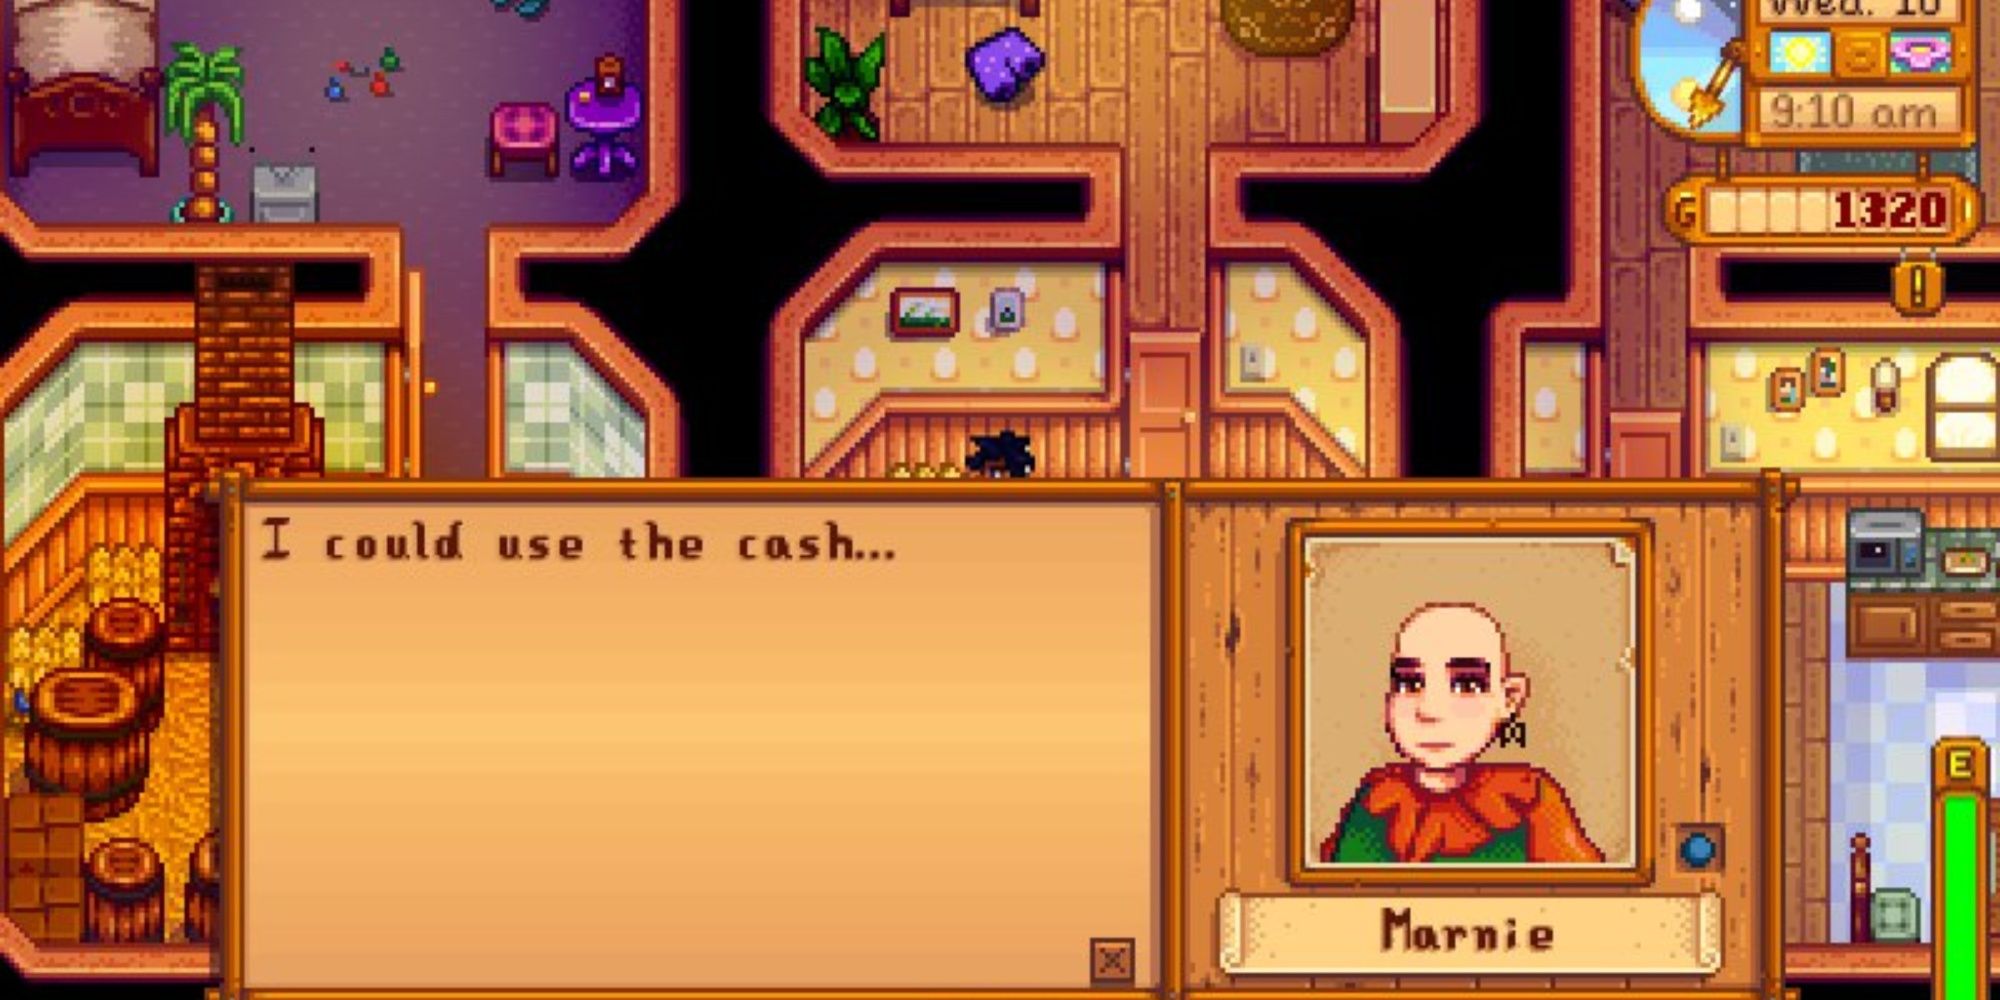 Stardew Valley, Bald Marnie telling the player that she could use some cash during an interaction